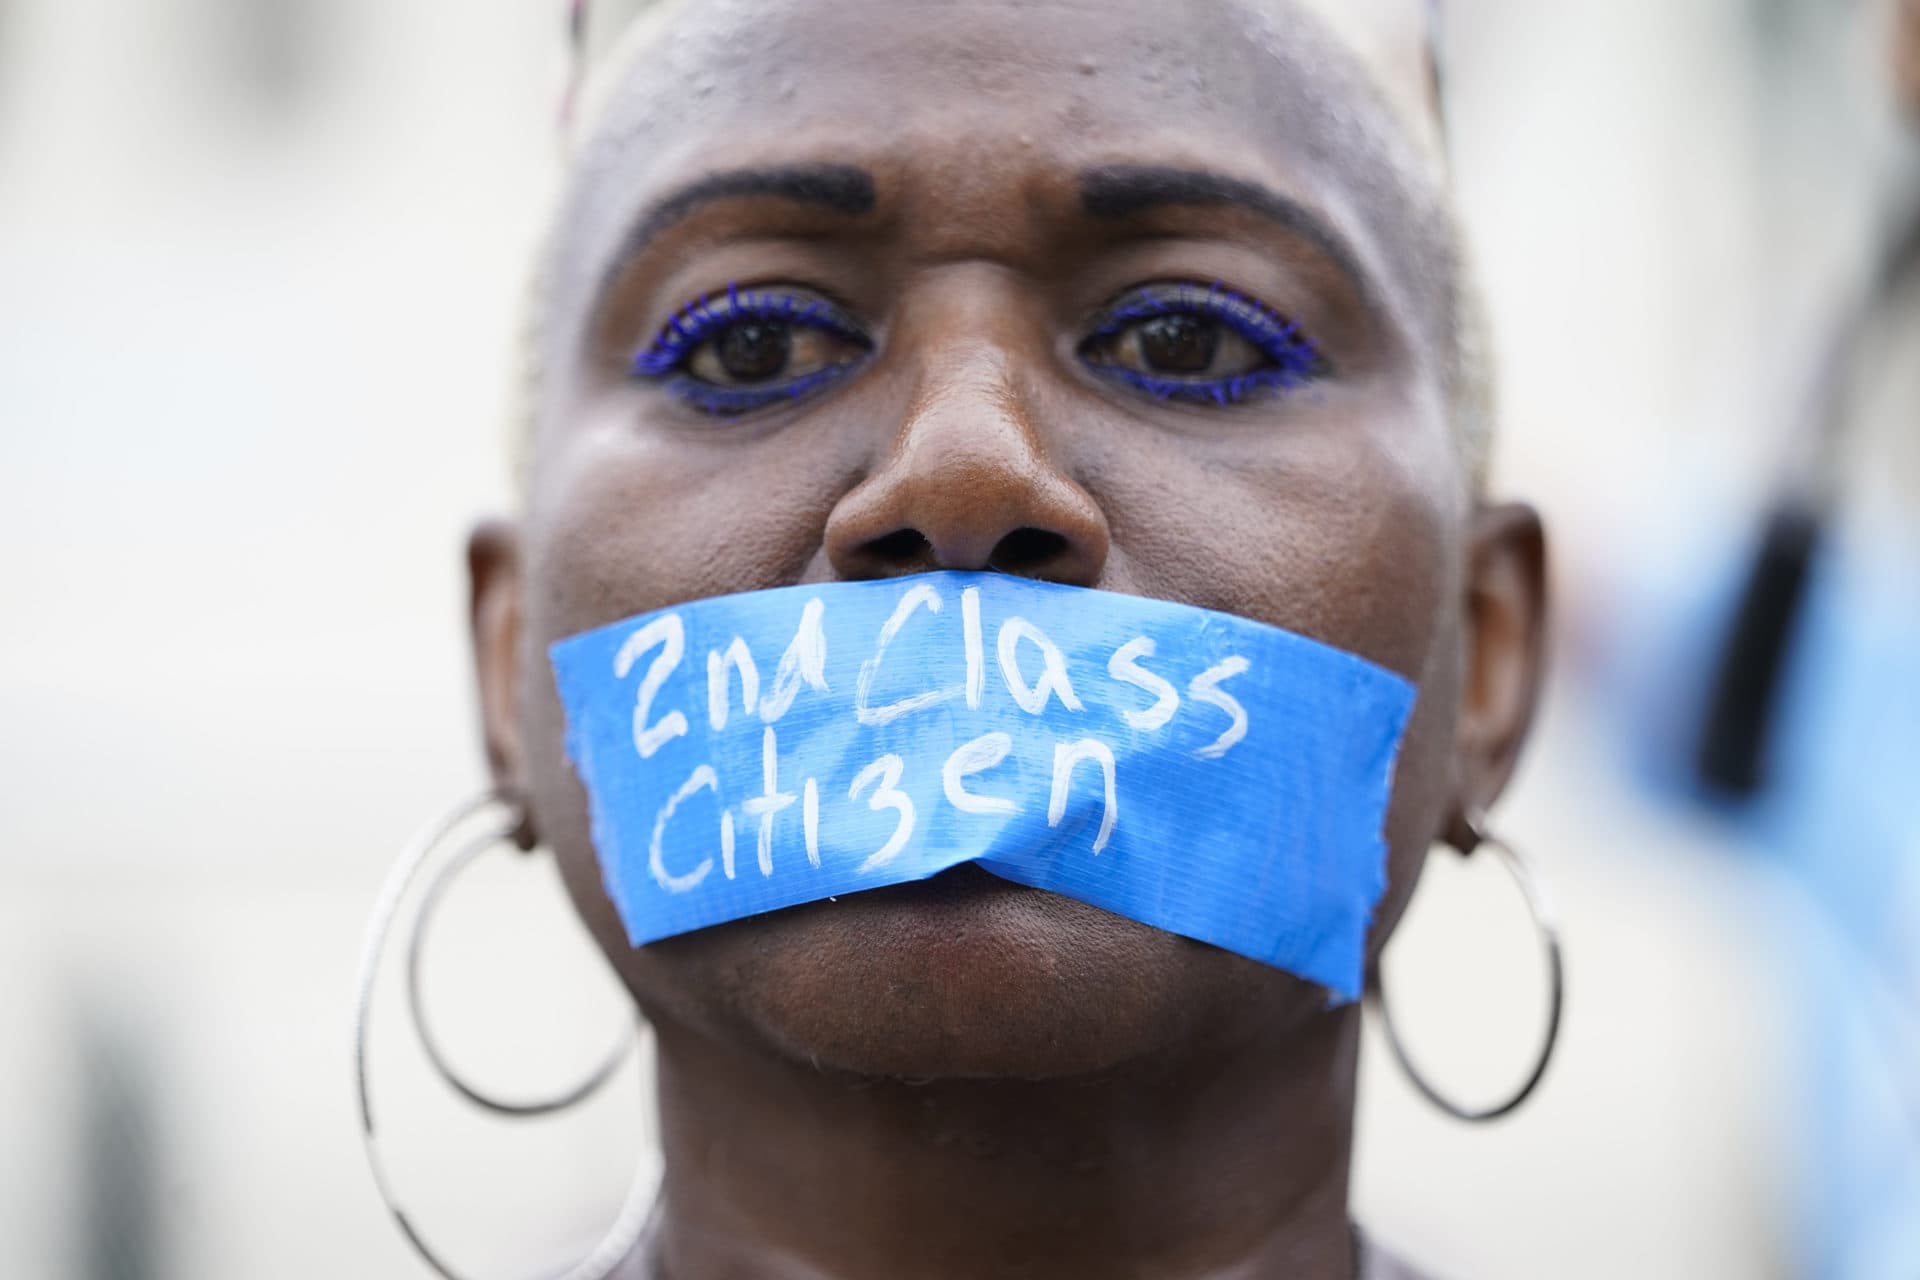 An abortion-rights activist wears tape reading &quot;2nd Class Citizen&quot; on their mouth as they protest outside the Supreme Court on Friday. (Jacquelyn Martin/AP)